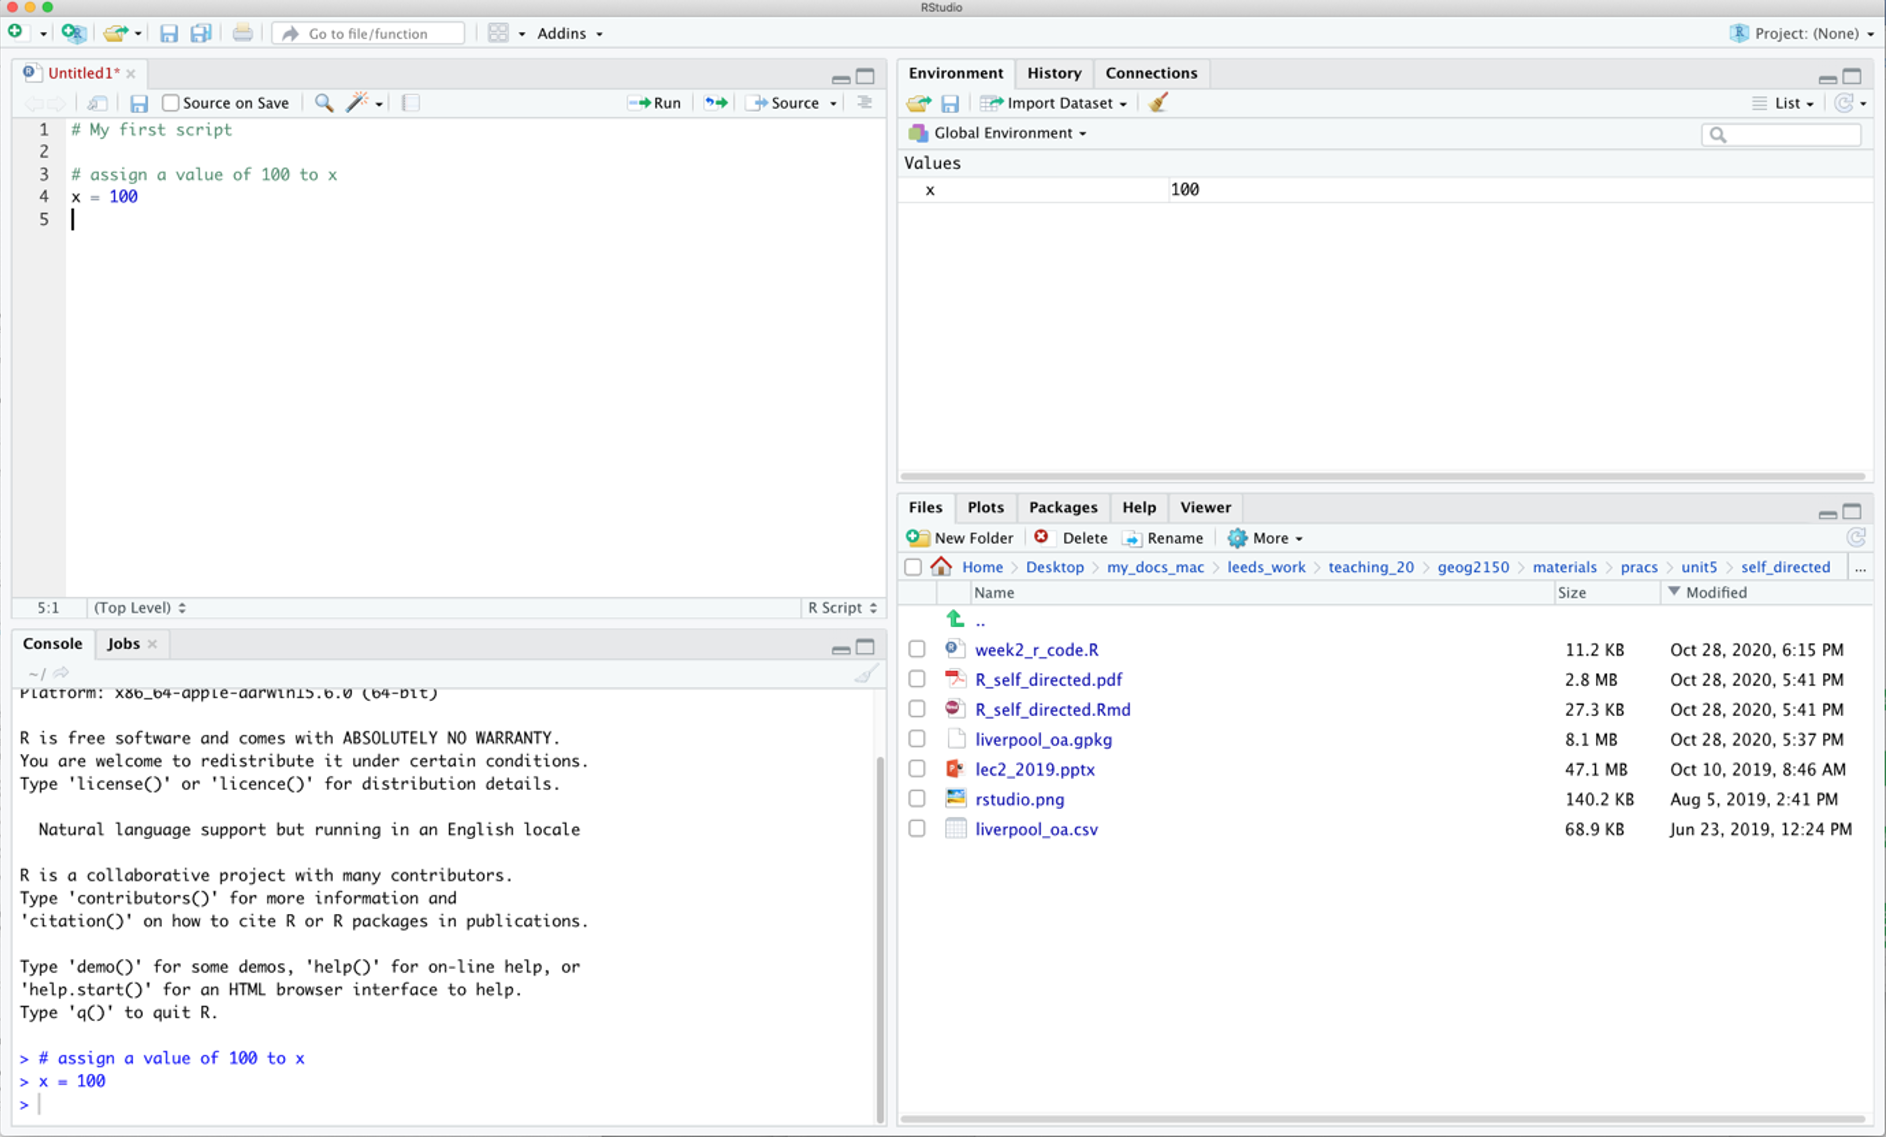 The RStudio interface.